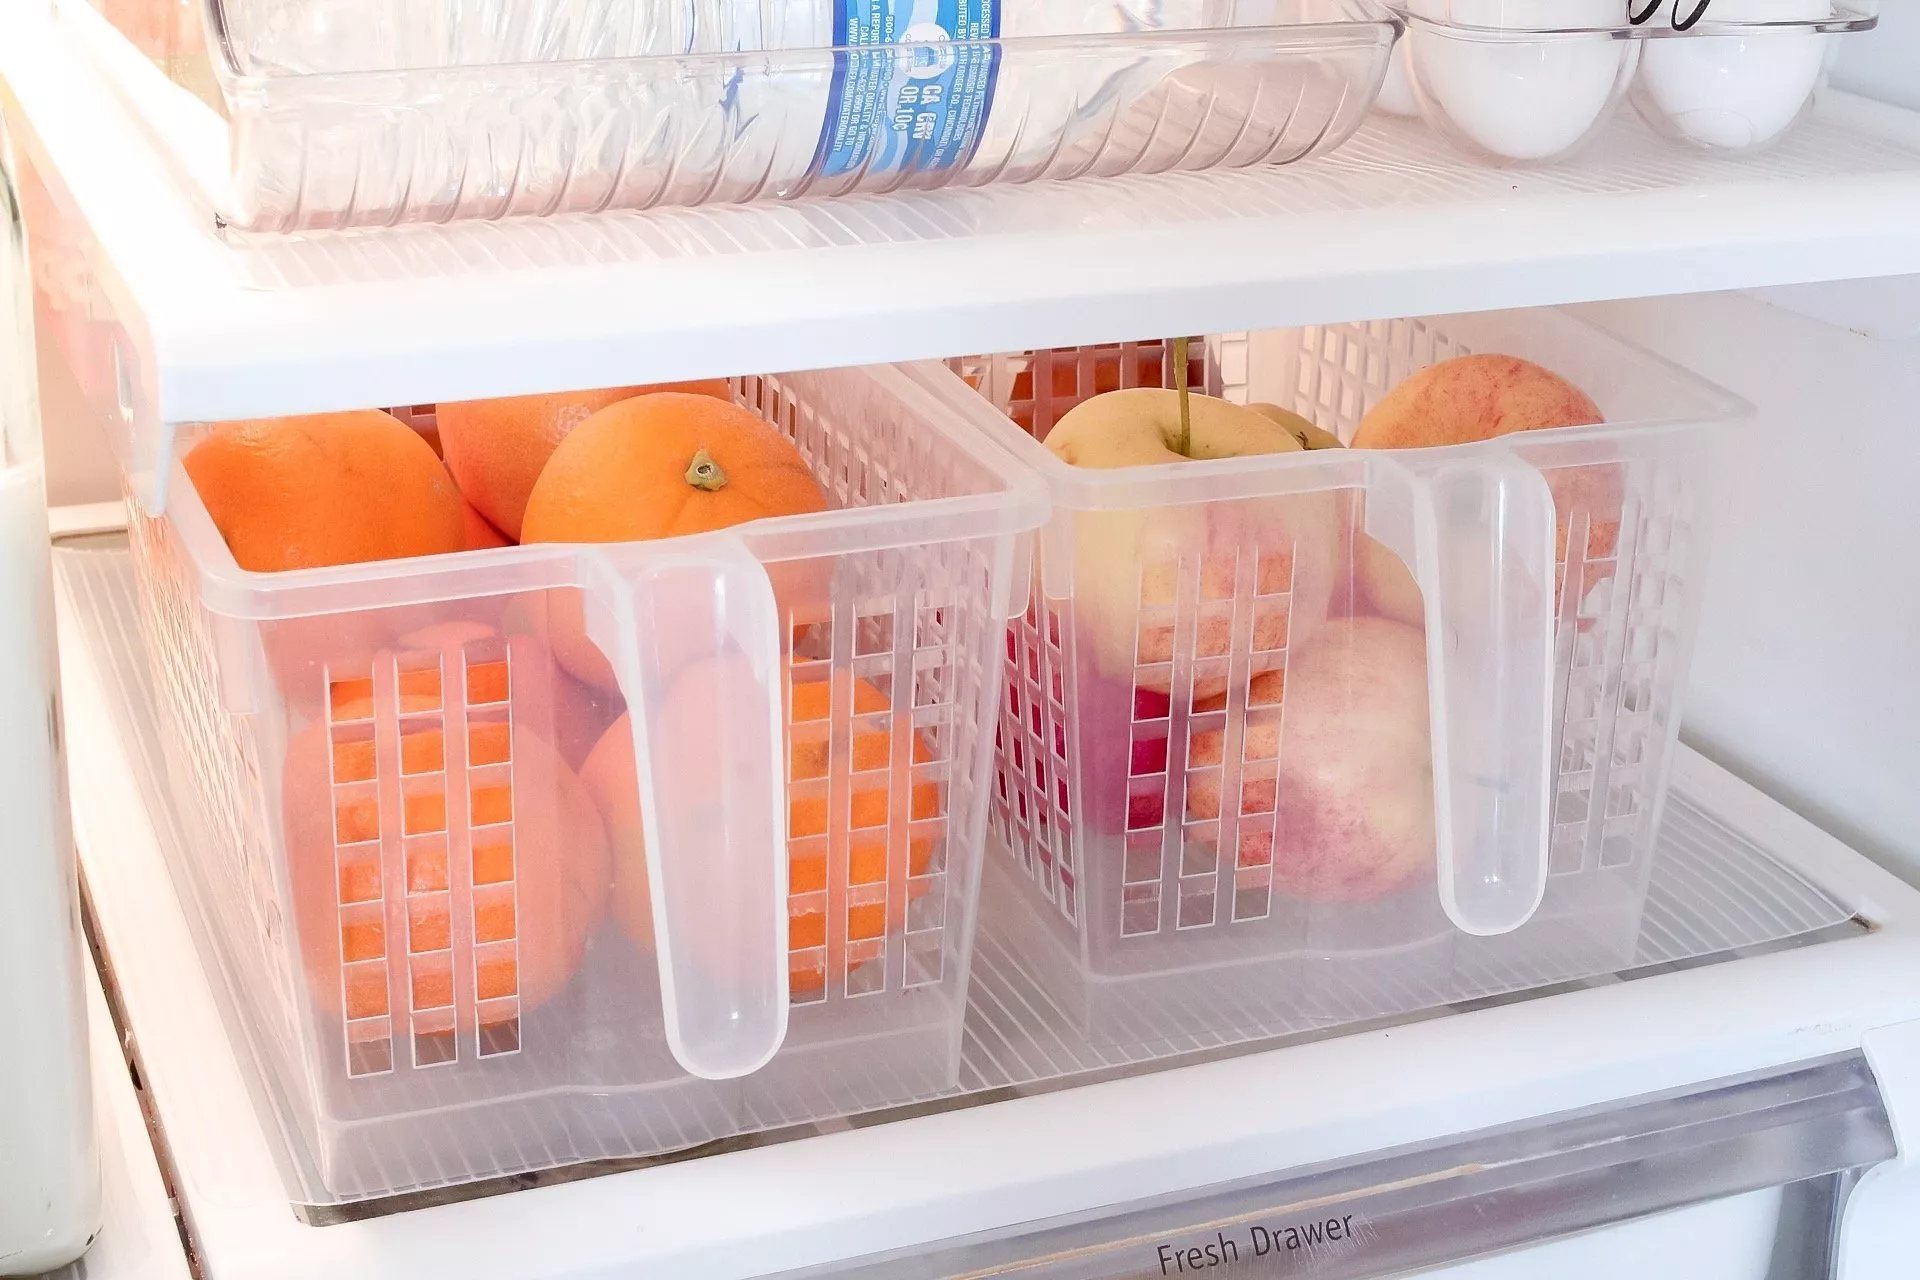 two organizer bin filled with fruits inside the fridge